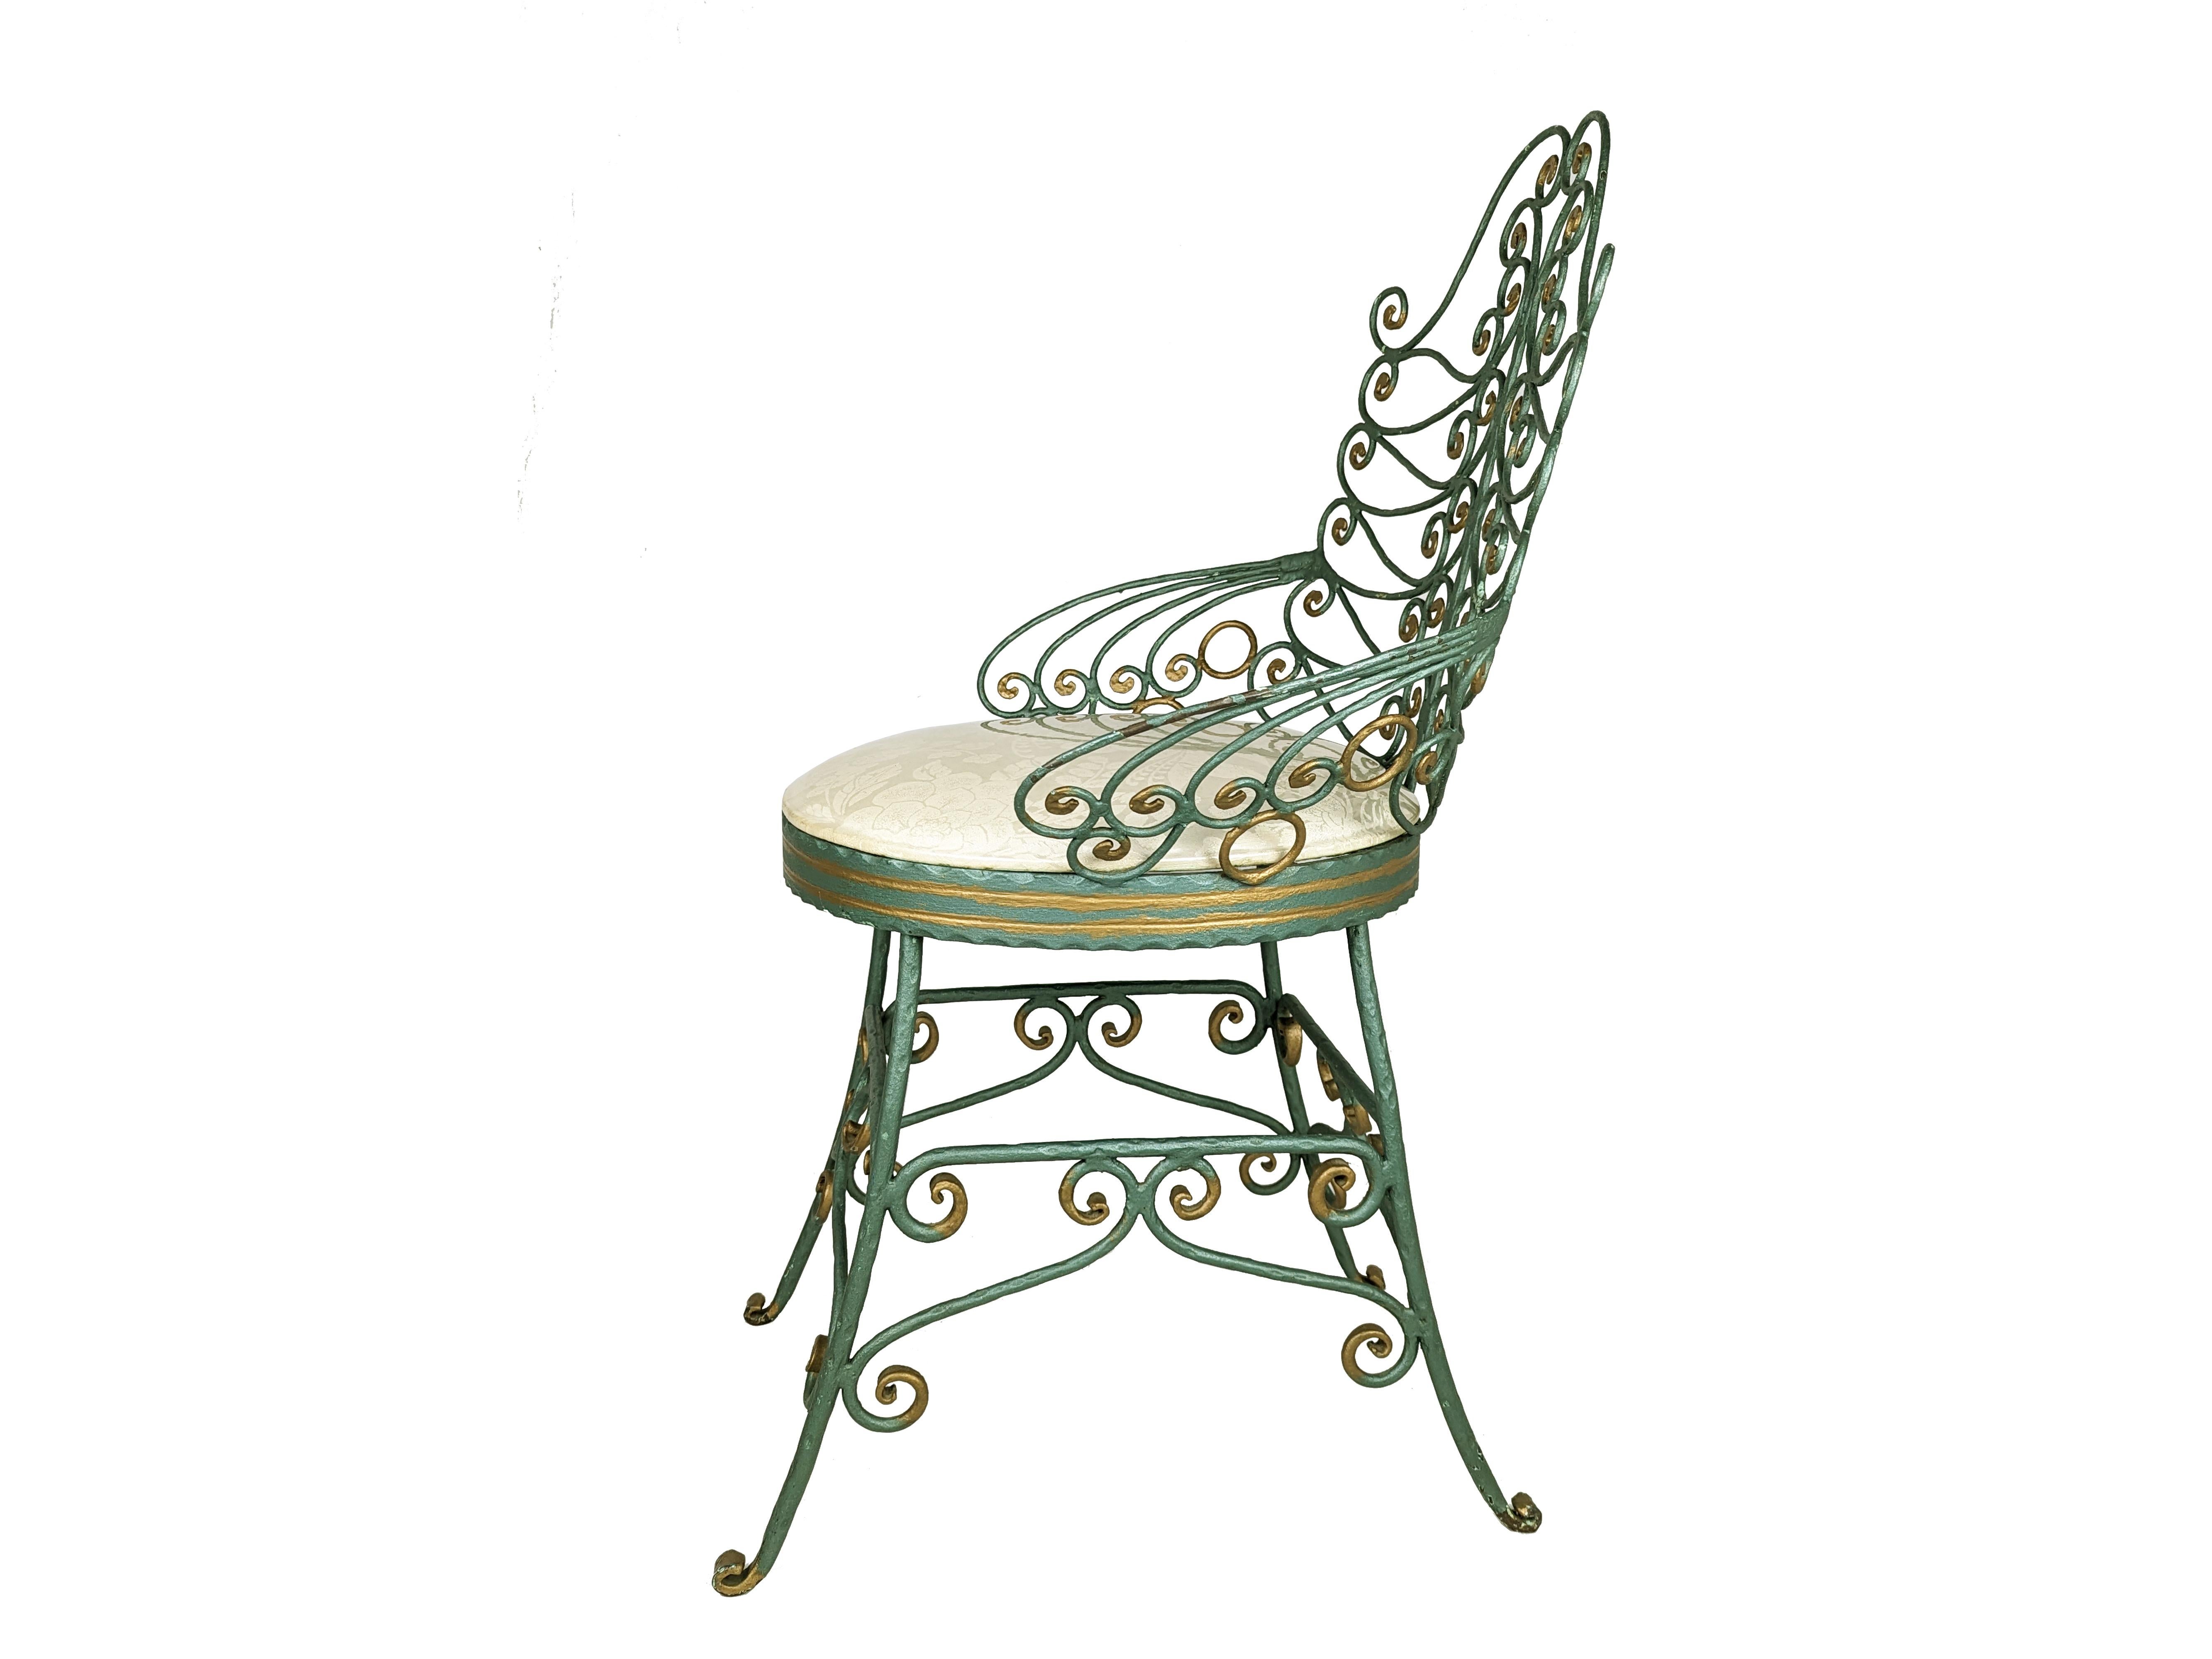 Rare and pleasant wrought iron chair presumably from the mid-20th century. made in the style of peacock chairs with a complex design of dense scrolls. The chair features a green color with golden decorative details. The seat, covered in transparent